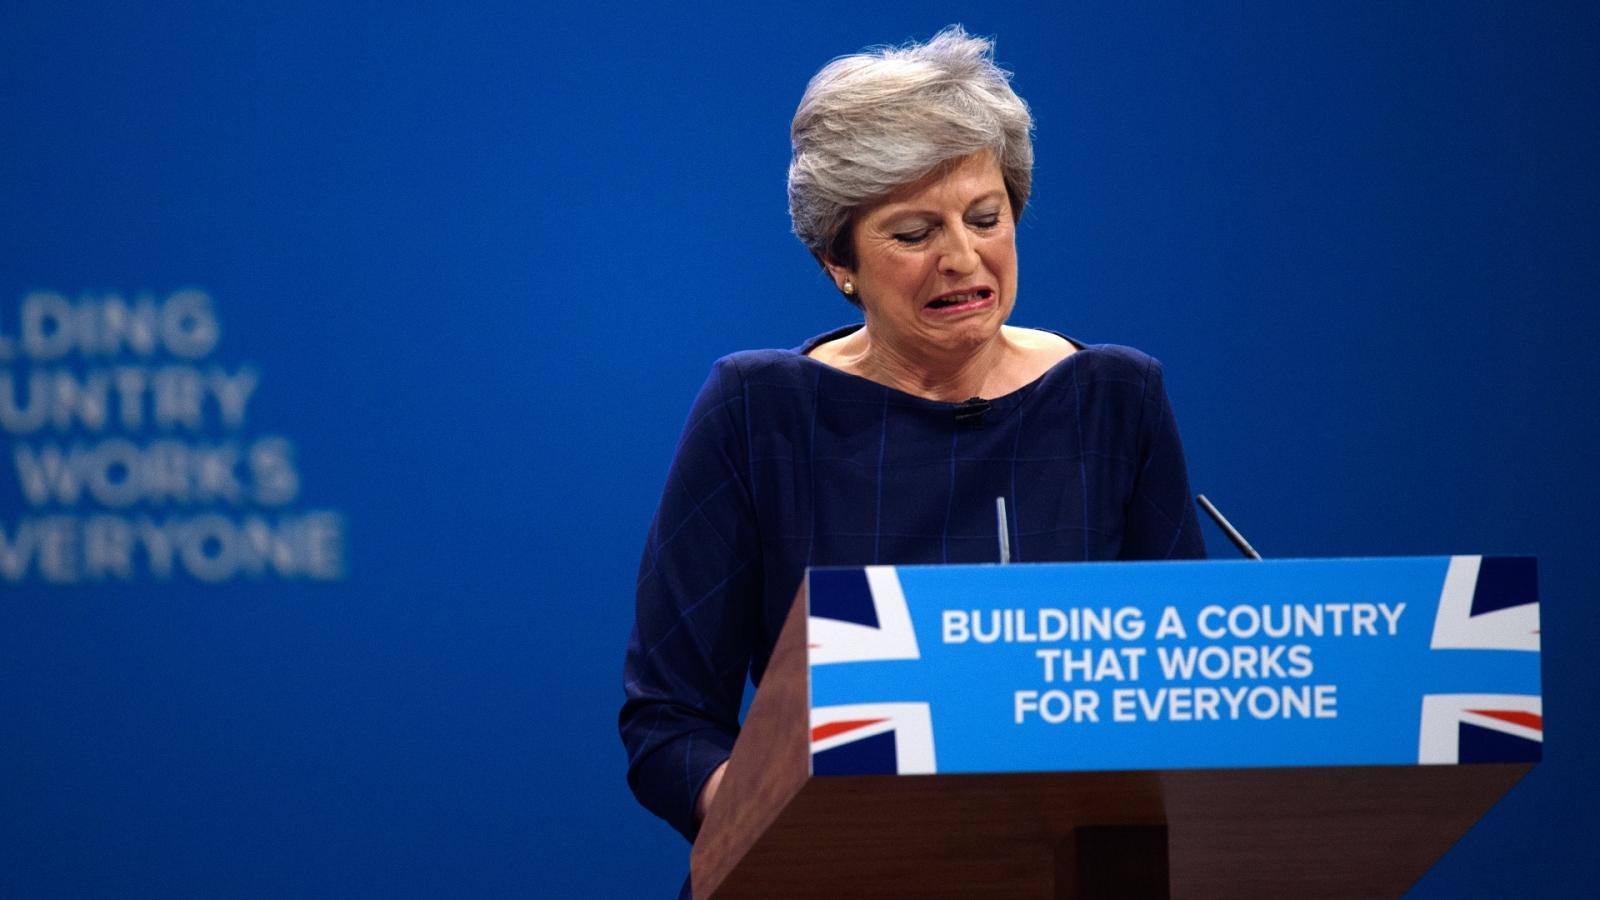 Theresa May could have delivered a speech to save Britain